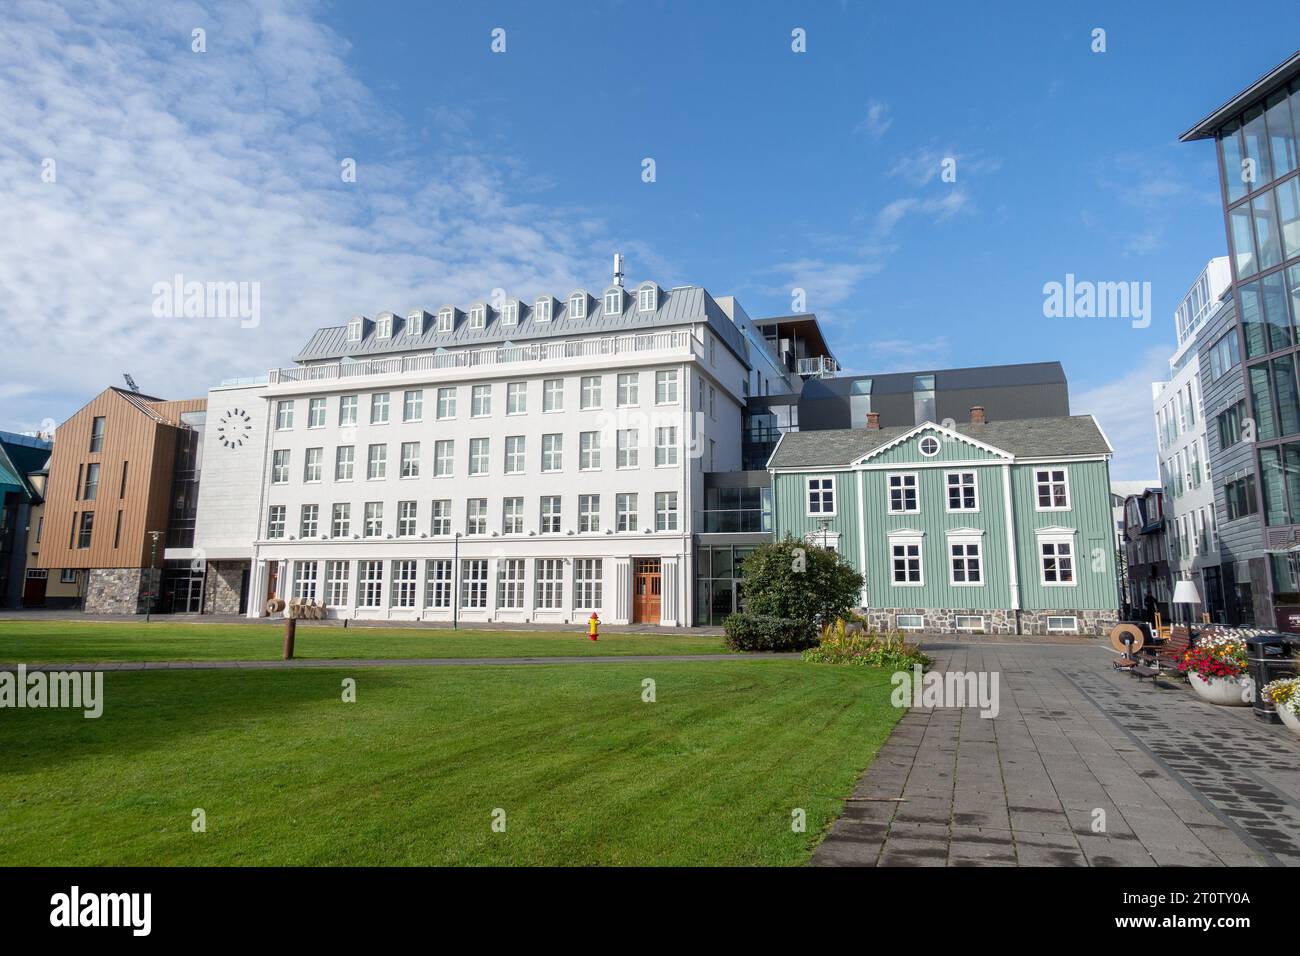 Iceland Parliament Hotel A Hilton Curio Collection Hotel And Conference Centre In Thorvaldsenstraeti Reykjavik Iceland Stock Photo